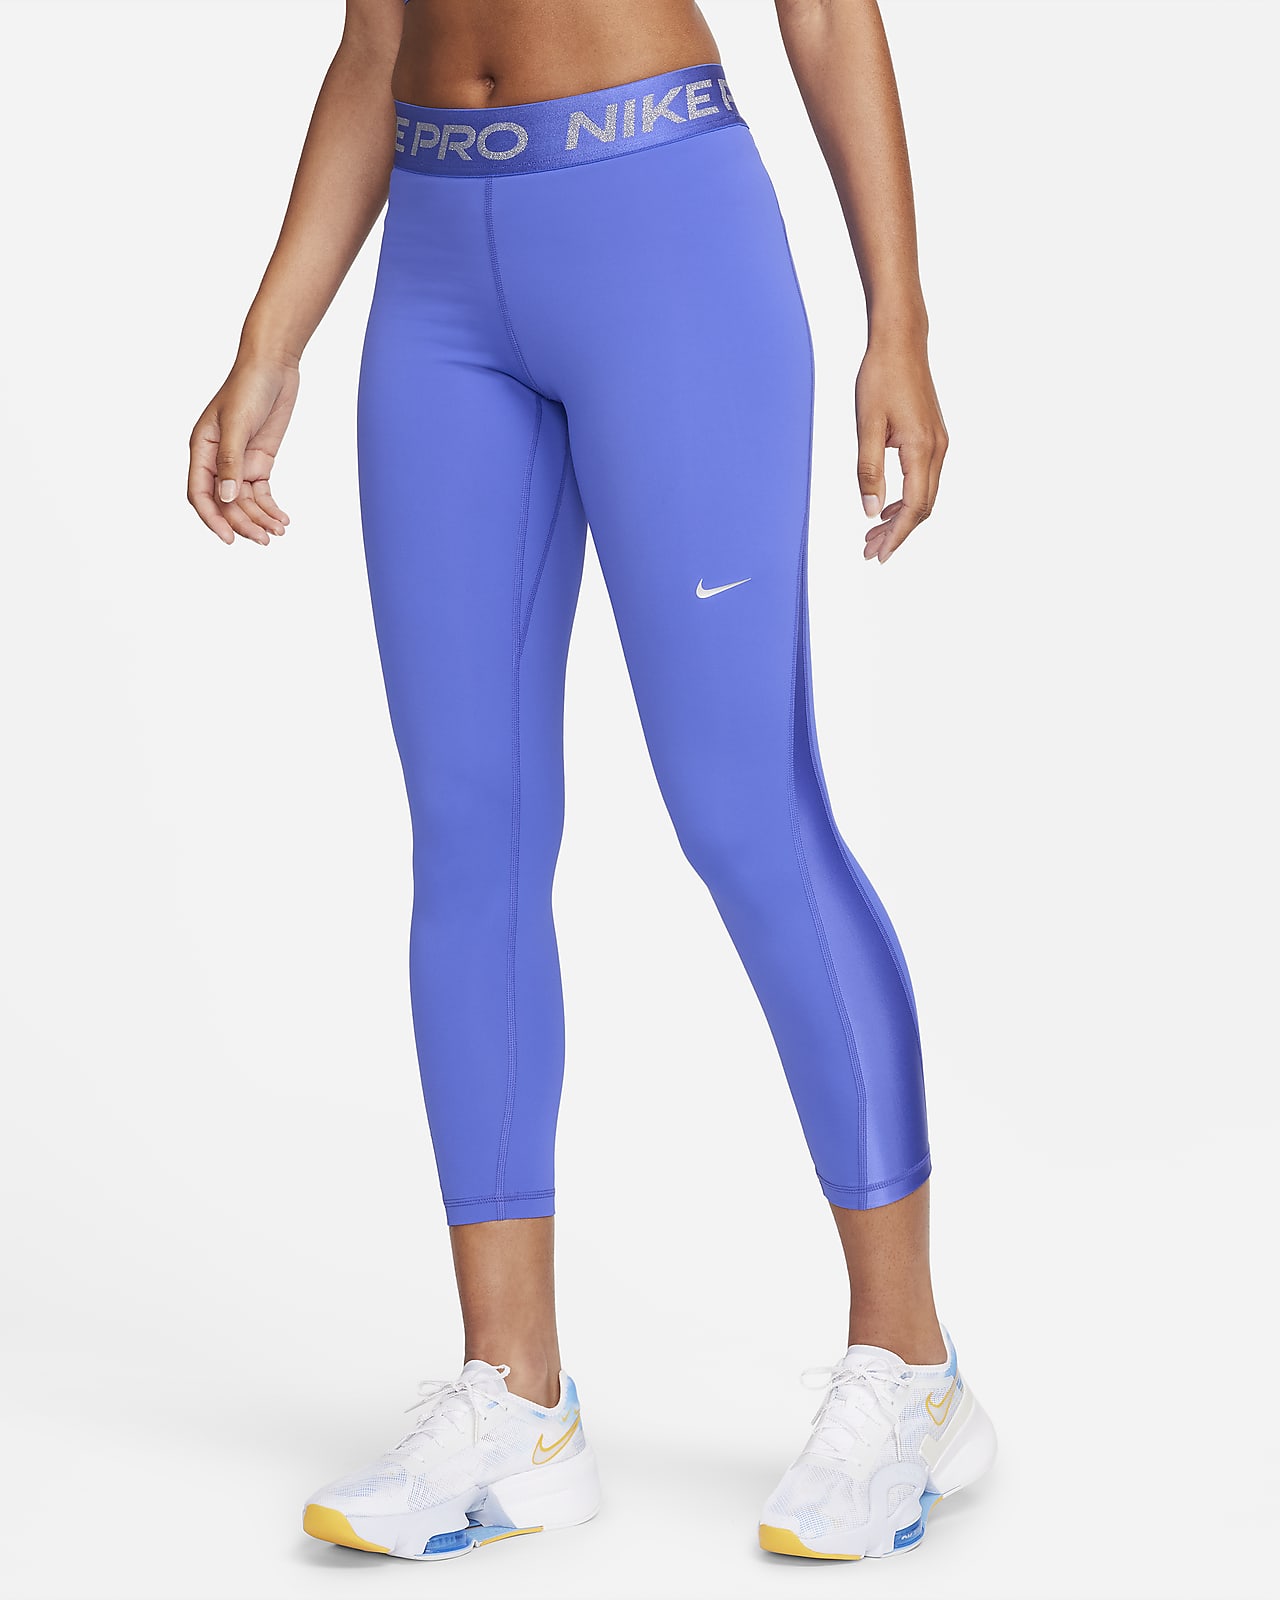 NIKE WORTH THE HYPE? NIKE PRO WOMEN'S MID RISE 7/8 LEGGING TRY ON REVIEW  HAUL 